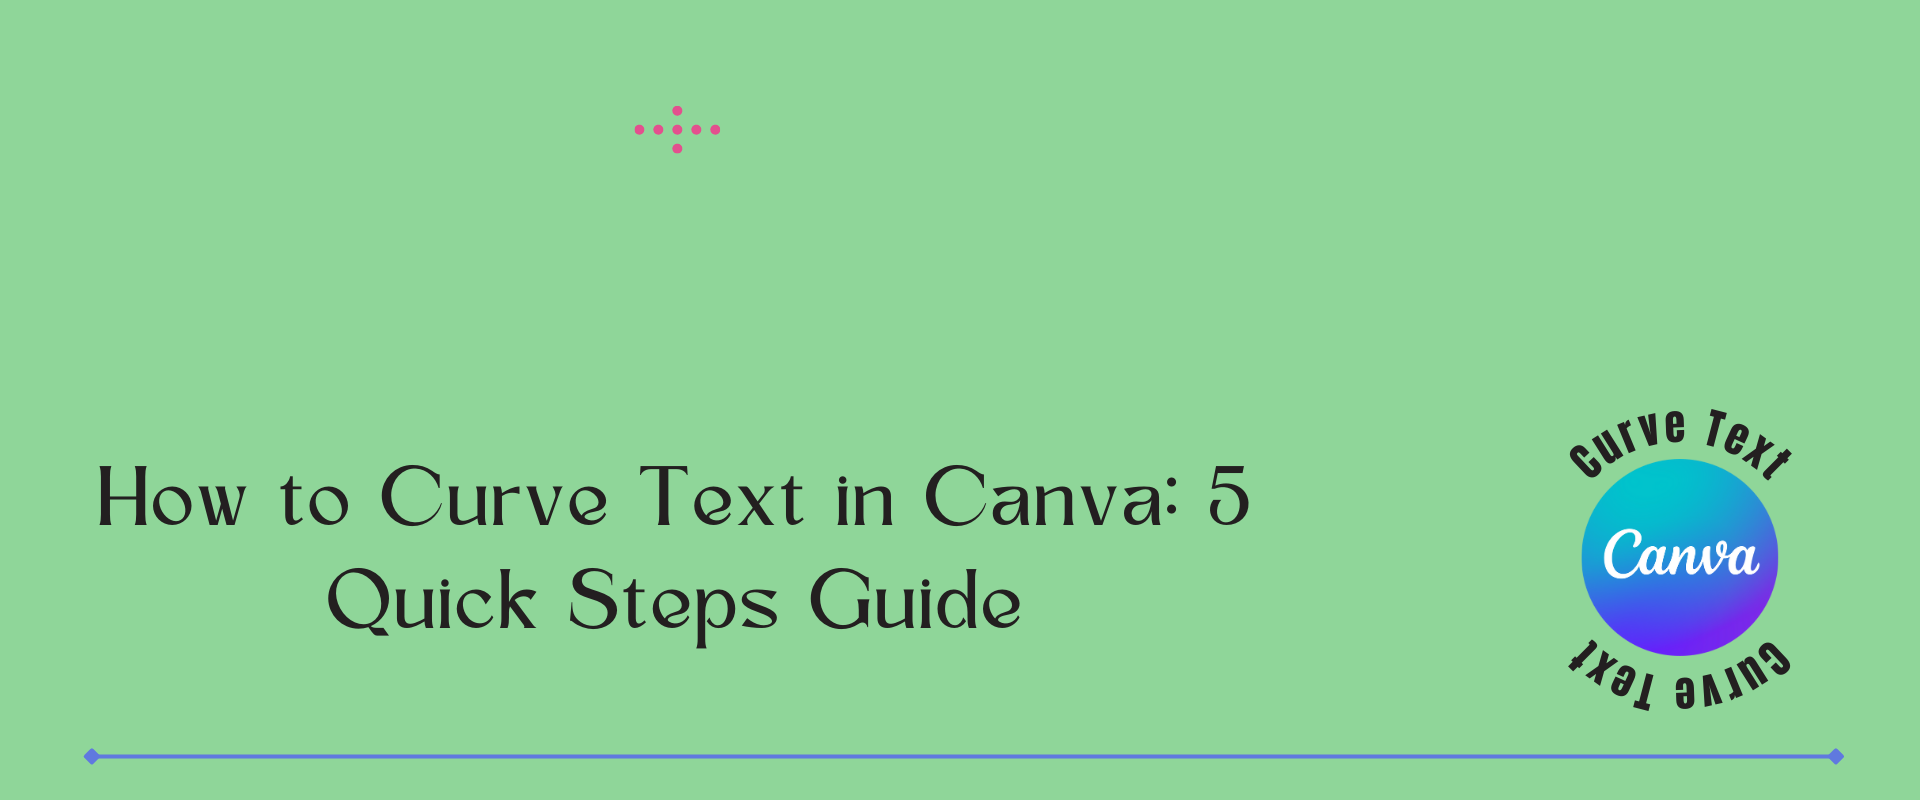 How to Curve Text in Canva: Best 5 Quick Steps Guide